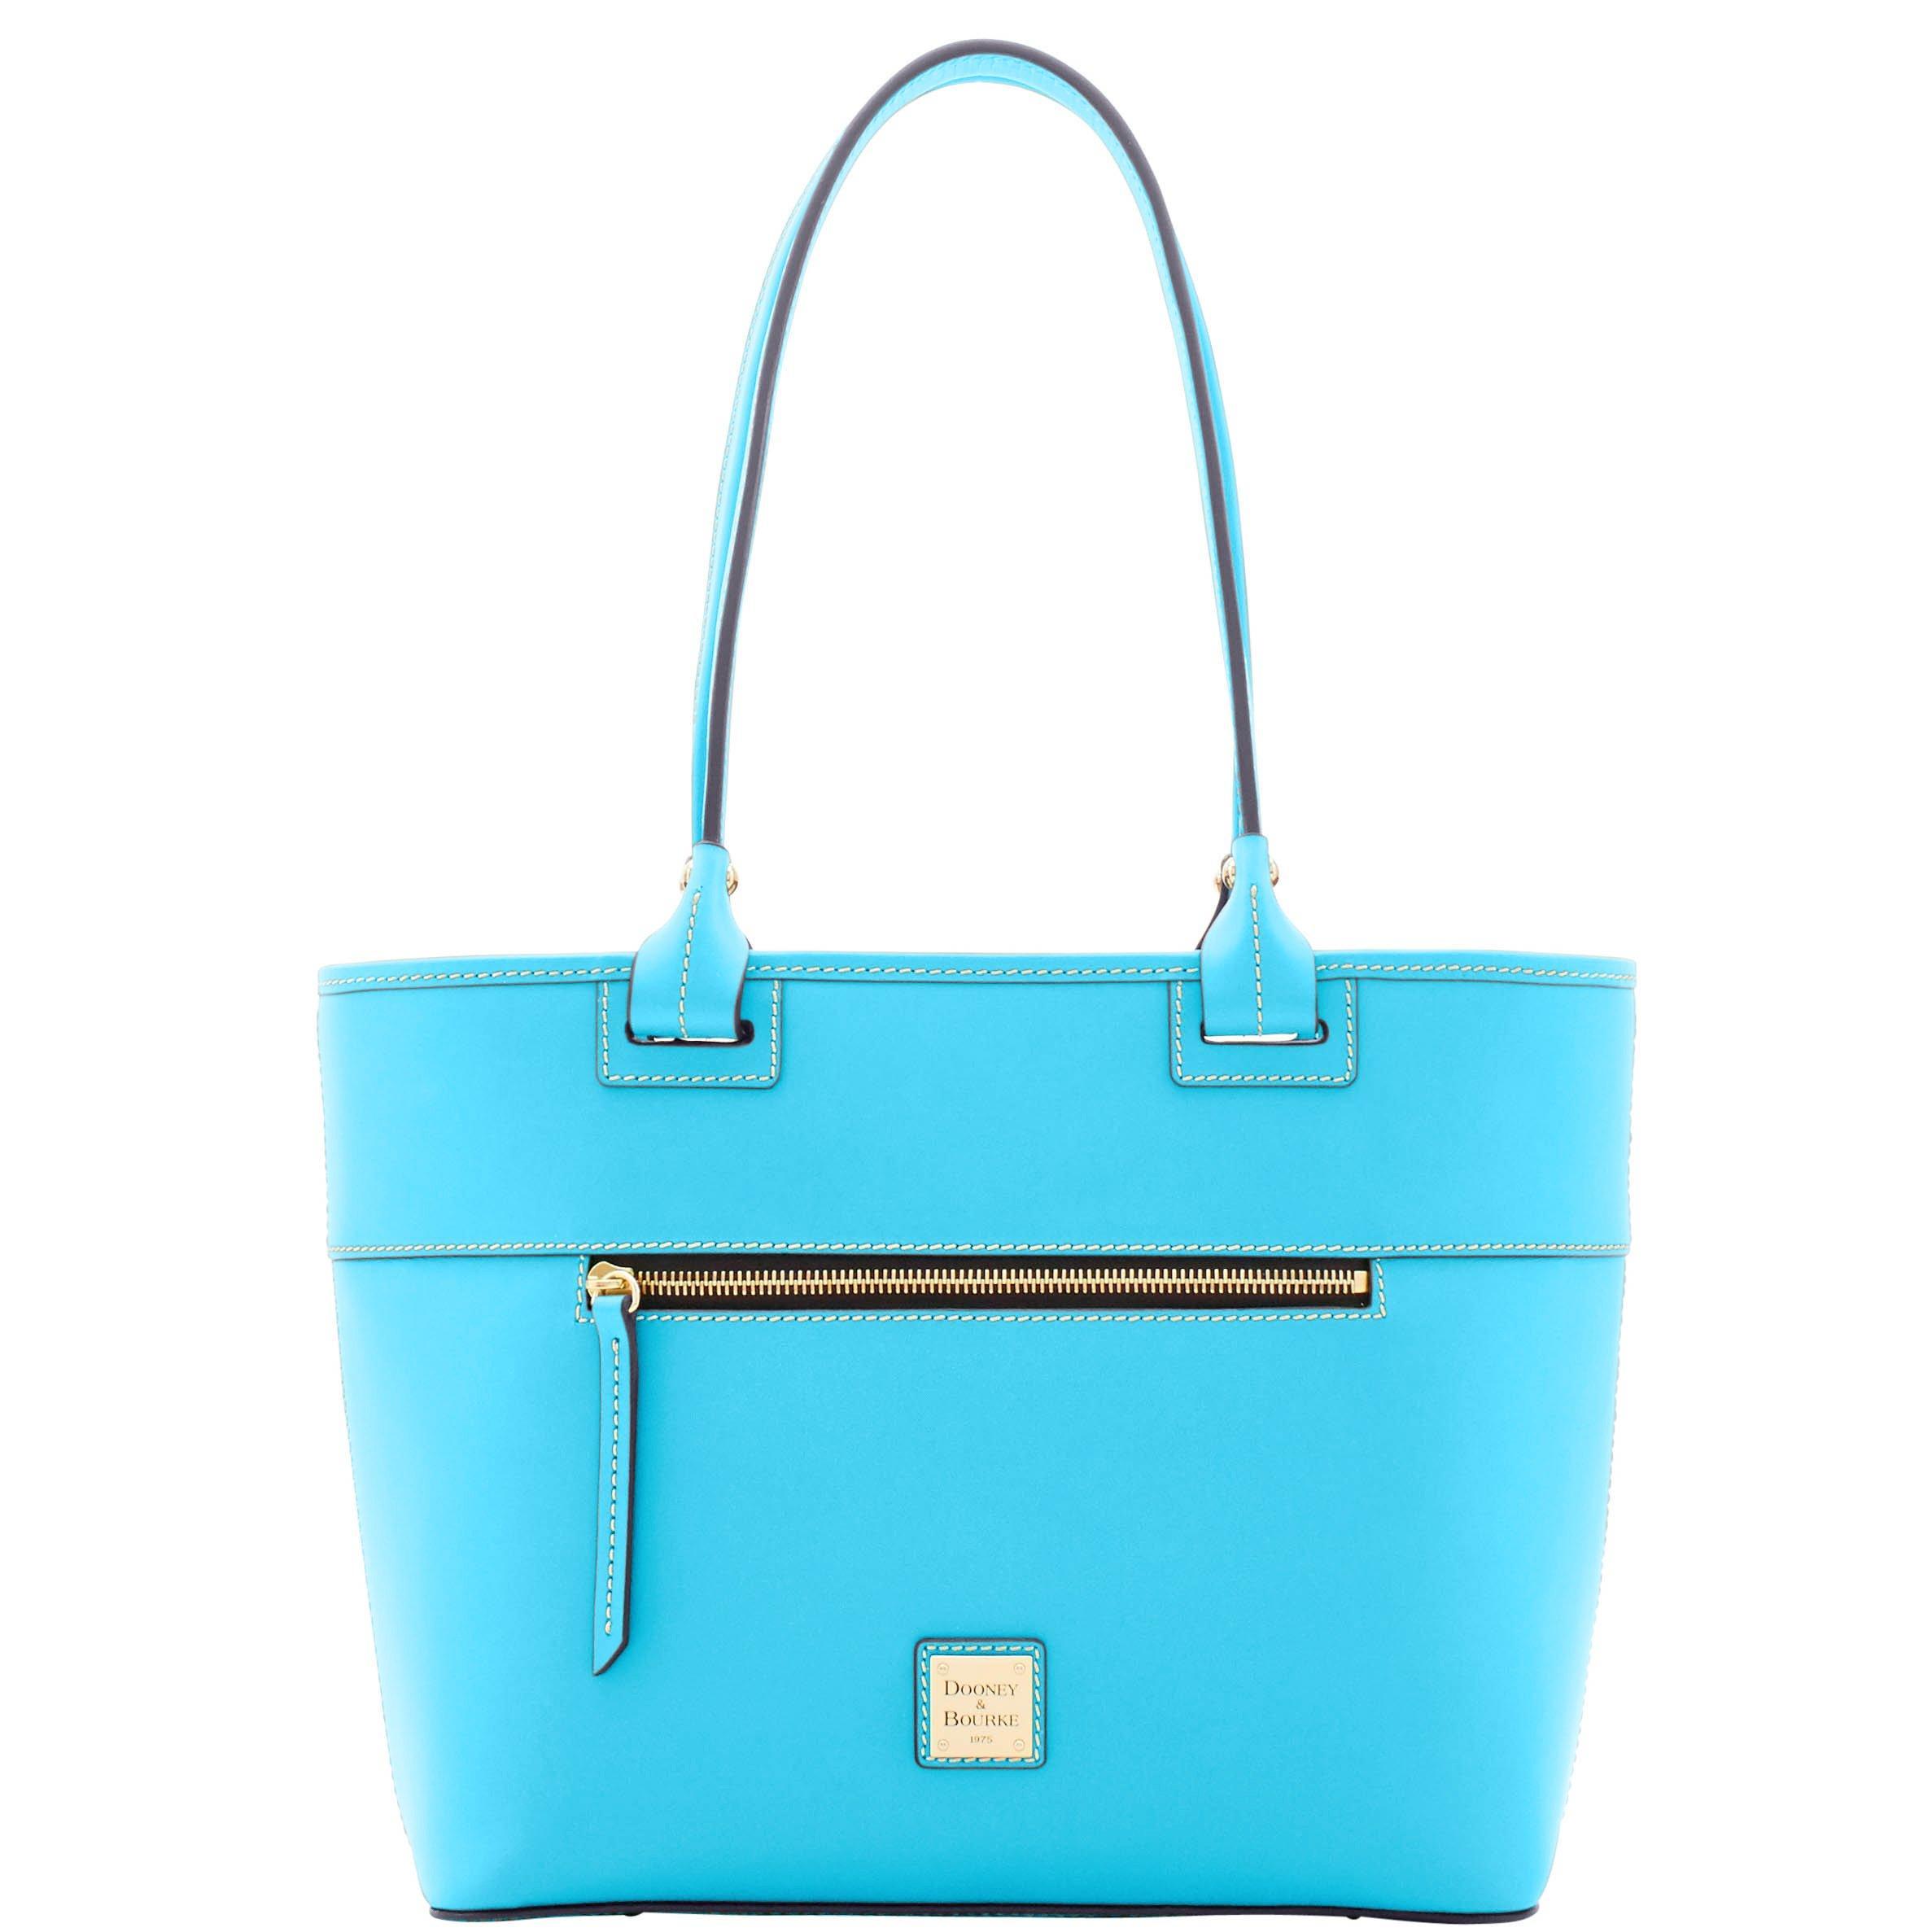 Dooney & Bourke Leather Beacon Zip Tote in Light Blue (Blue) - Save 28% ...